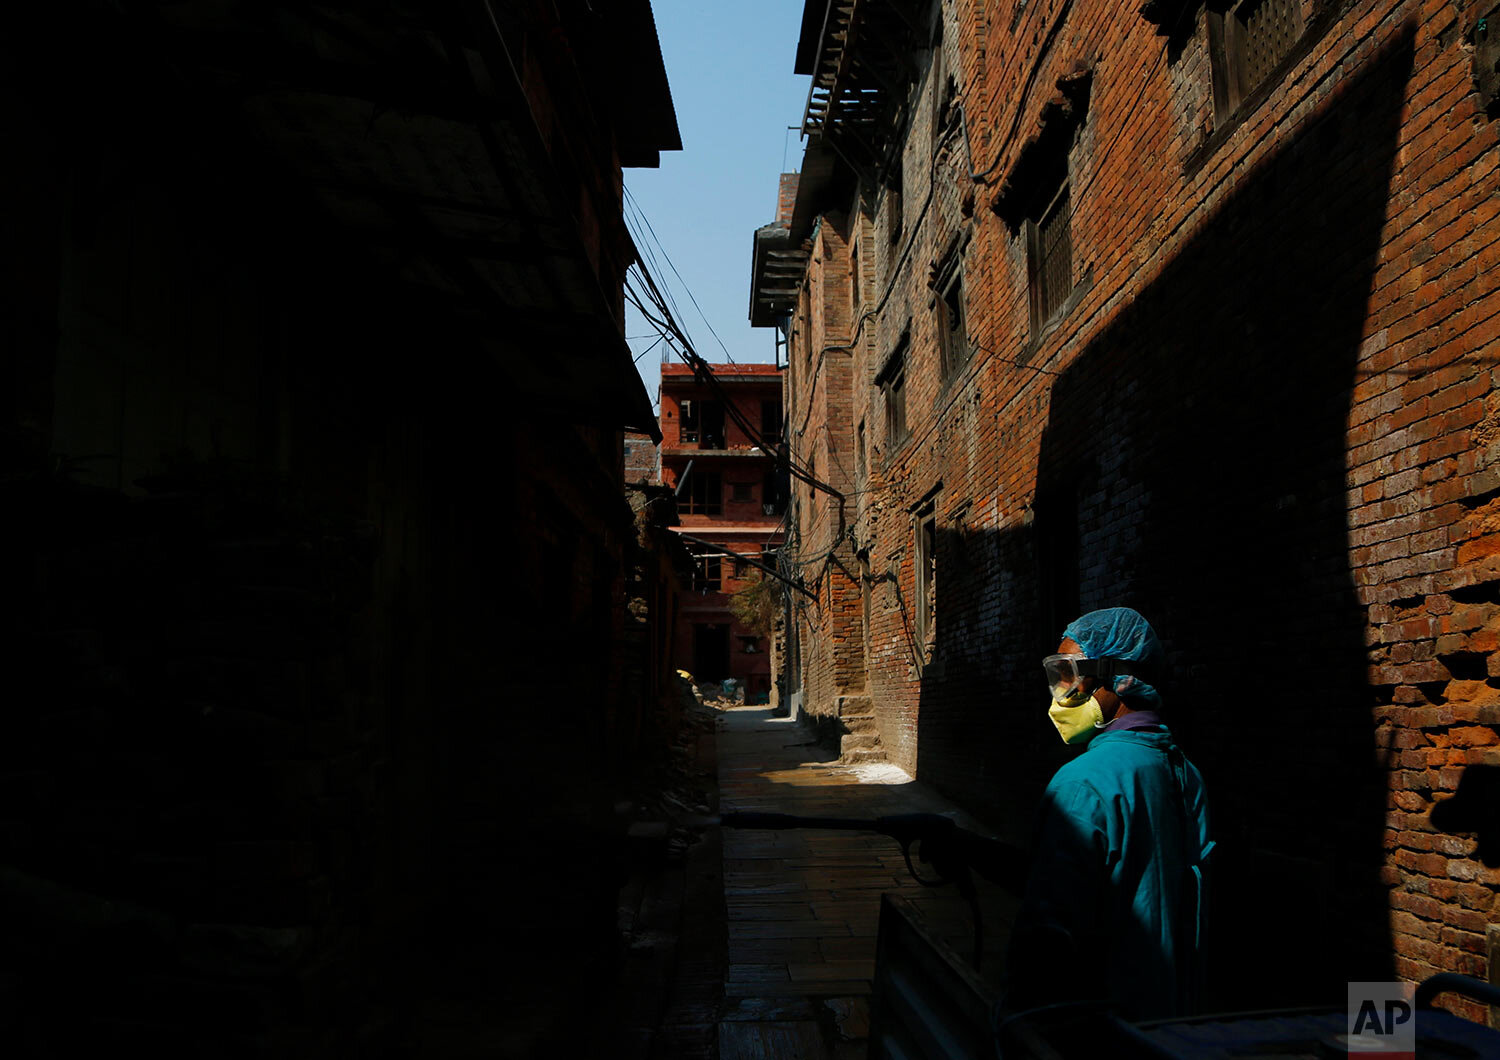  A Nepalese volunteer sprays disinfectants at a residential area as a precautionary measure against COVID-19 in Bhaktapur, Nepal, Monday, April 6, 2020. (AP Photo/Niranjan Shrestha) 